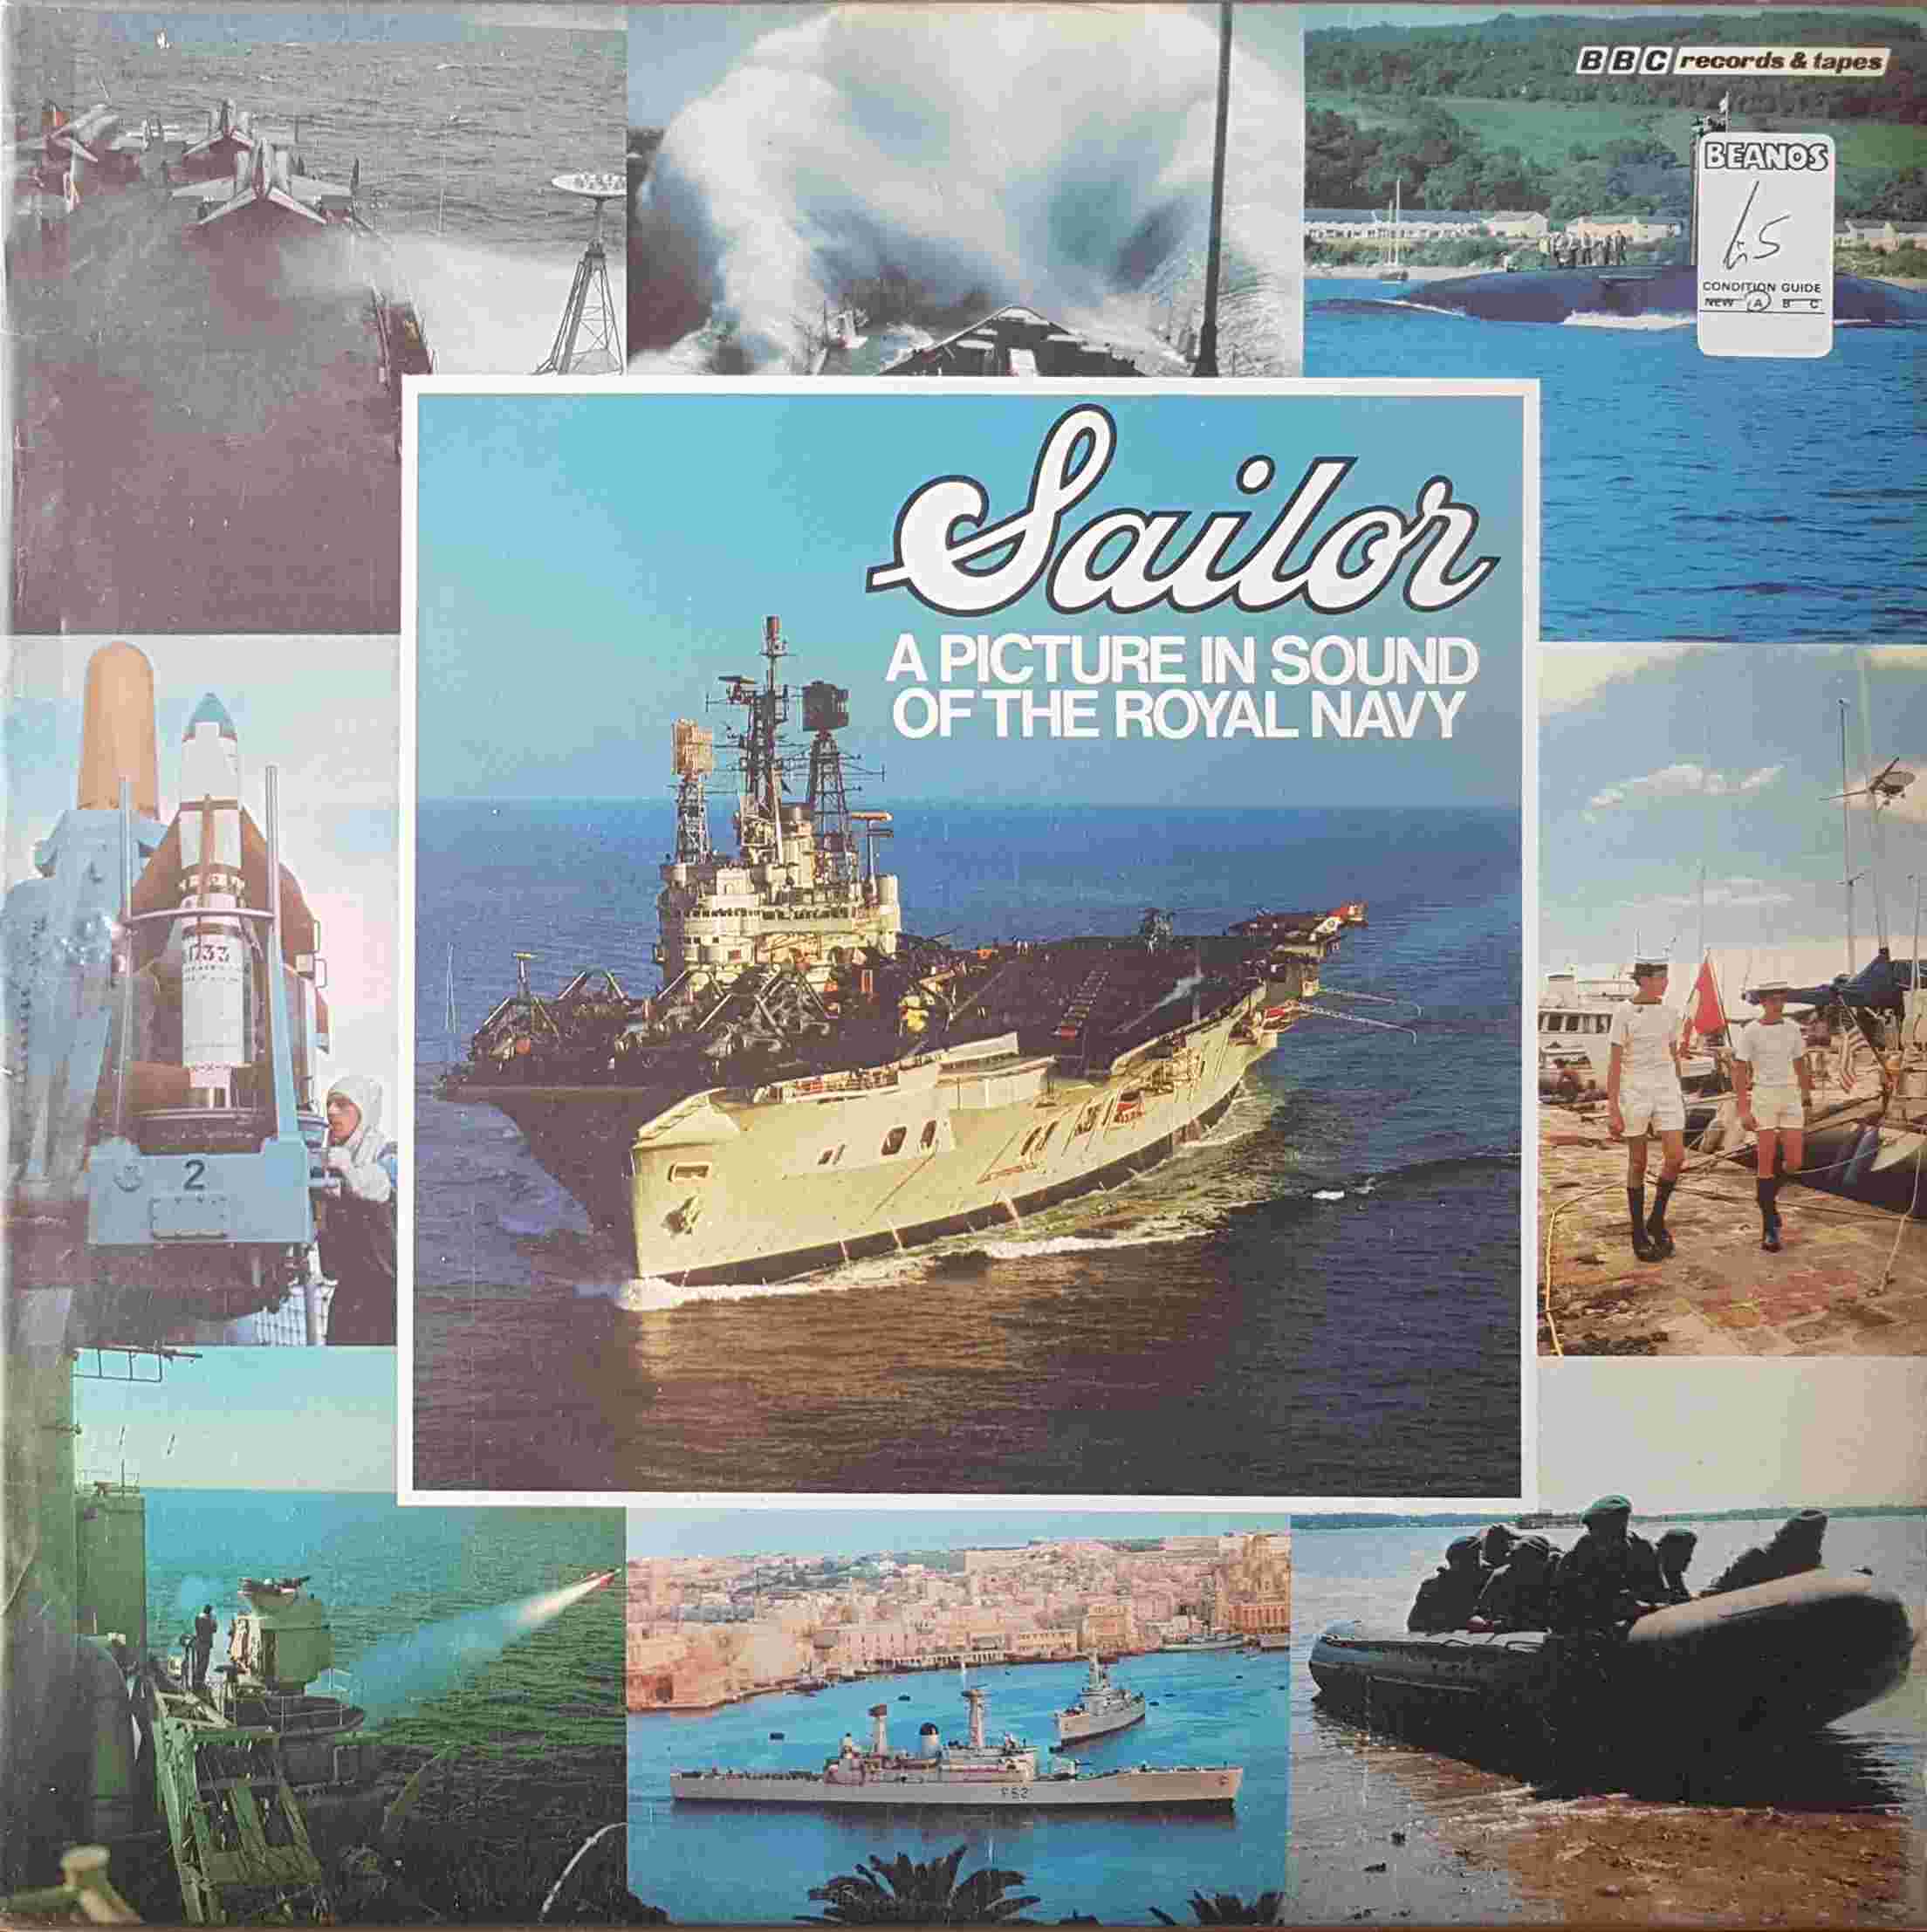 Picture of REH 318 Sailor - A picture of sound by artist Various from the BBC records and Tapes library